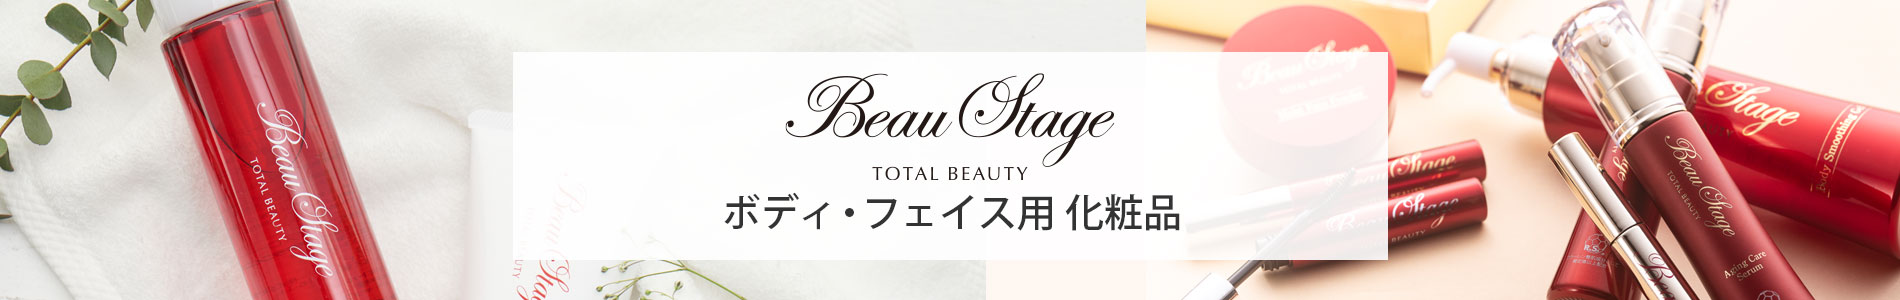 BeauStage